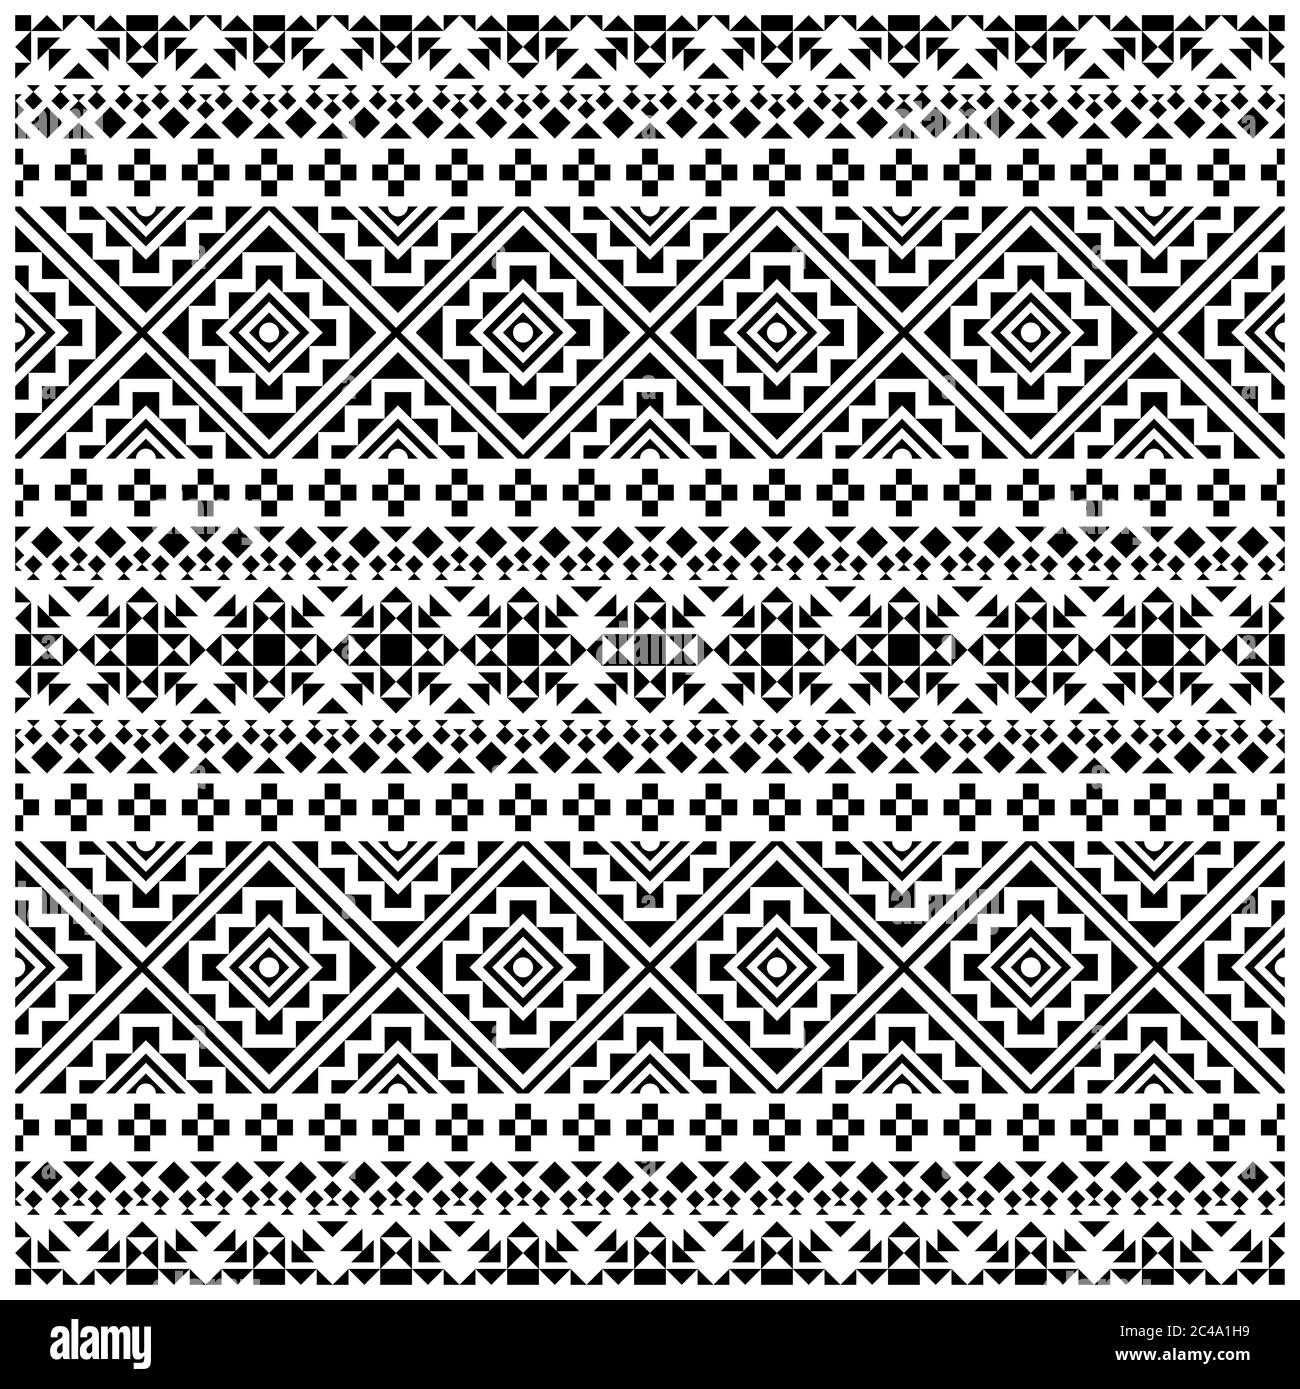 Seamless ethnic pattern. Traditional tribal pattern in black and white ...